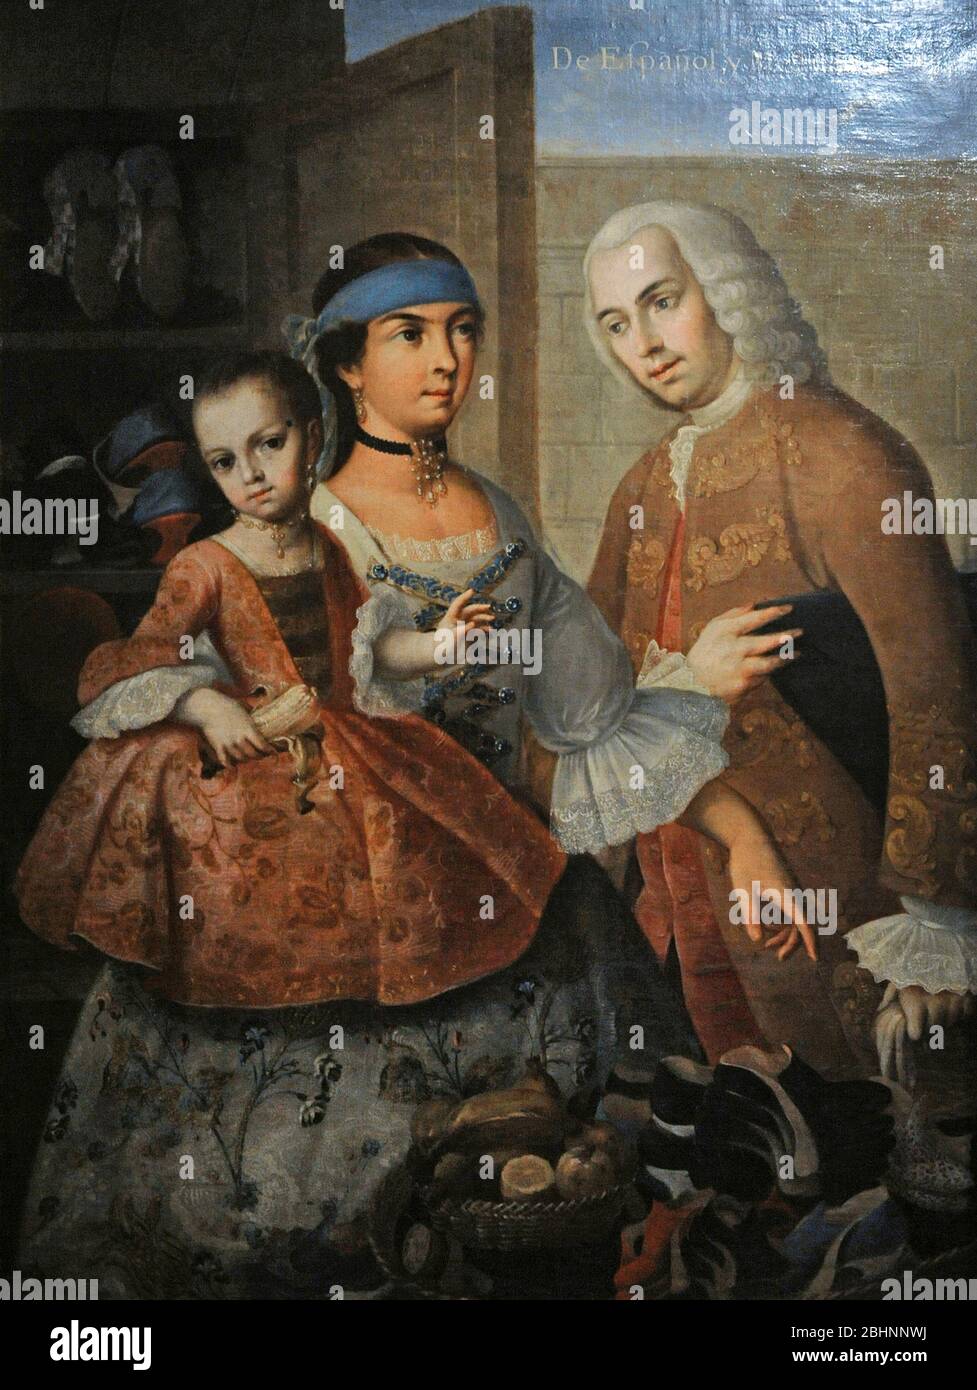 Casta painting. From Spaniard (right) and Mestiza (middle), Castiza (child), 1763. Miguel Cabrera (1695-1768). Painter of New Spain. Baroque style. Viceroyalty of New Spain. Mexico. Original Tittle: De español y mestiza, castiza. North America. Oil on canvas. Museum of the Americas. Madrid, Spain. Stock Photo